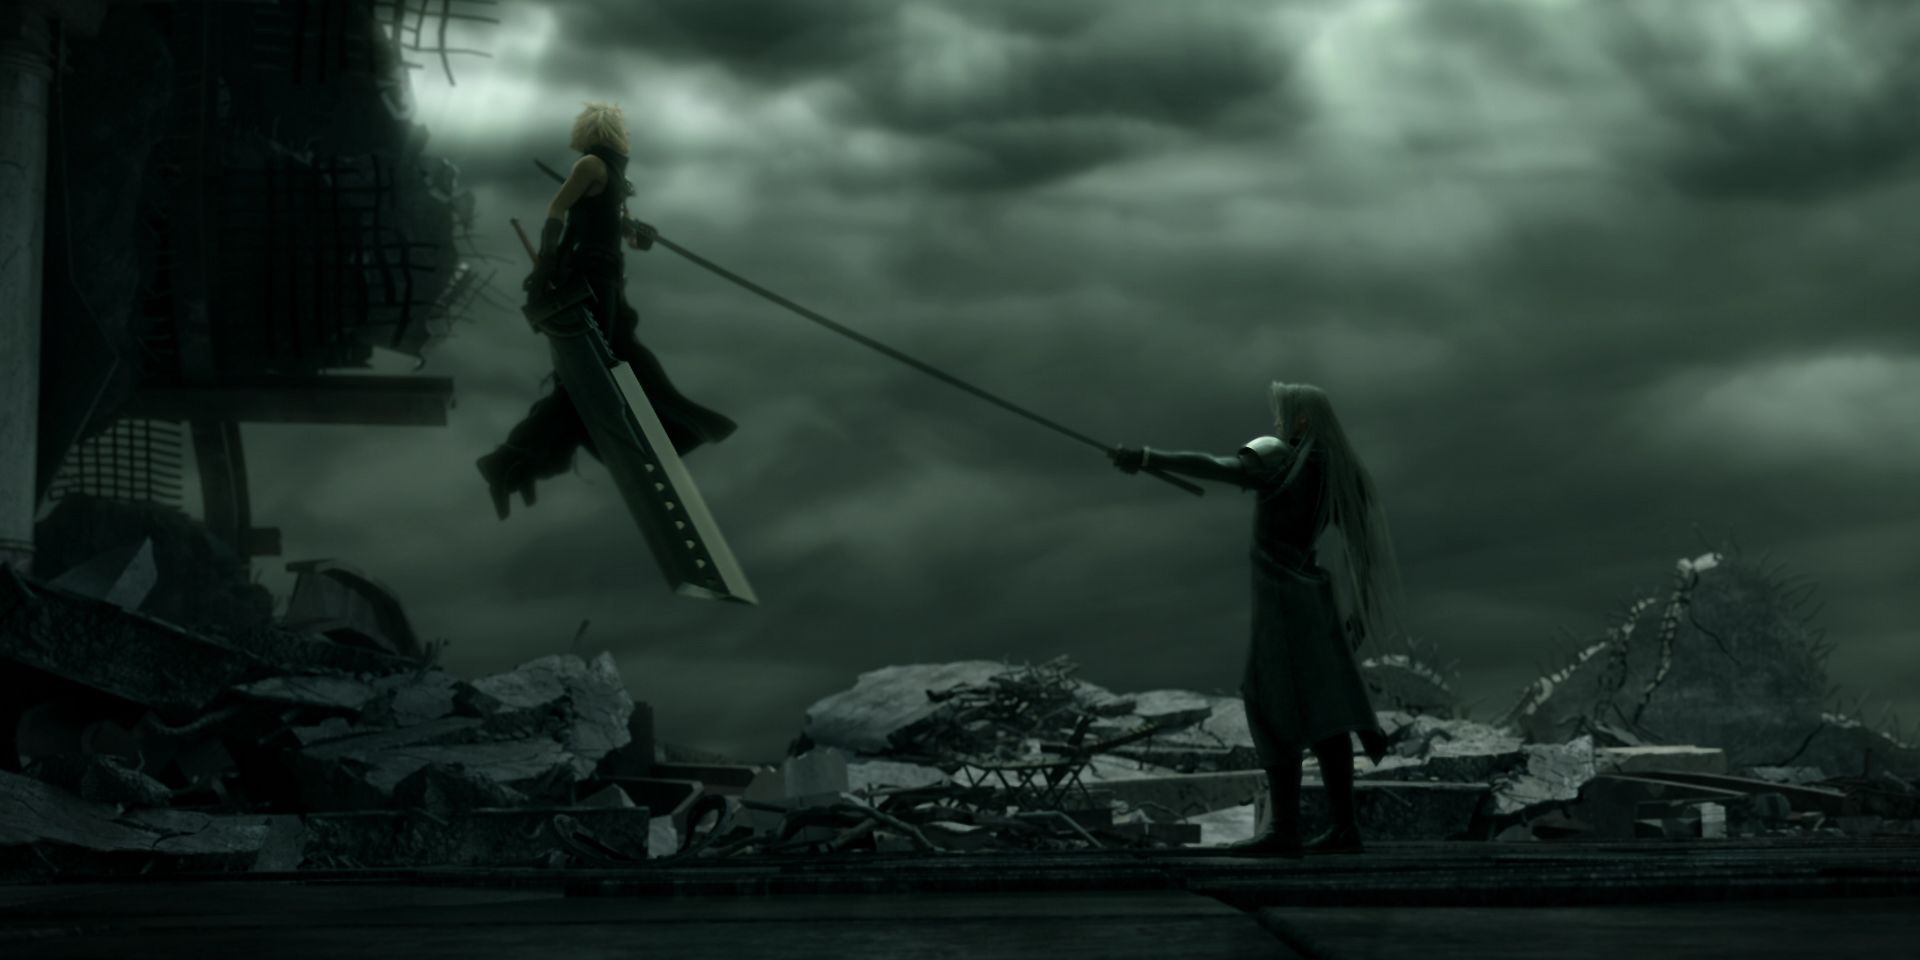 Sephiroth impaling Cloud with the Masamune in Final Fantasy VII Advent Children